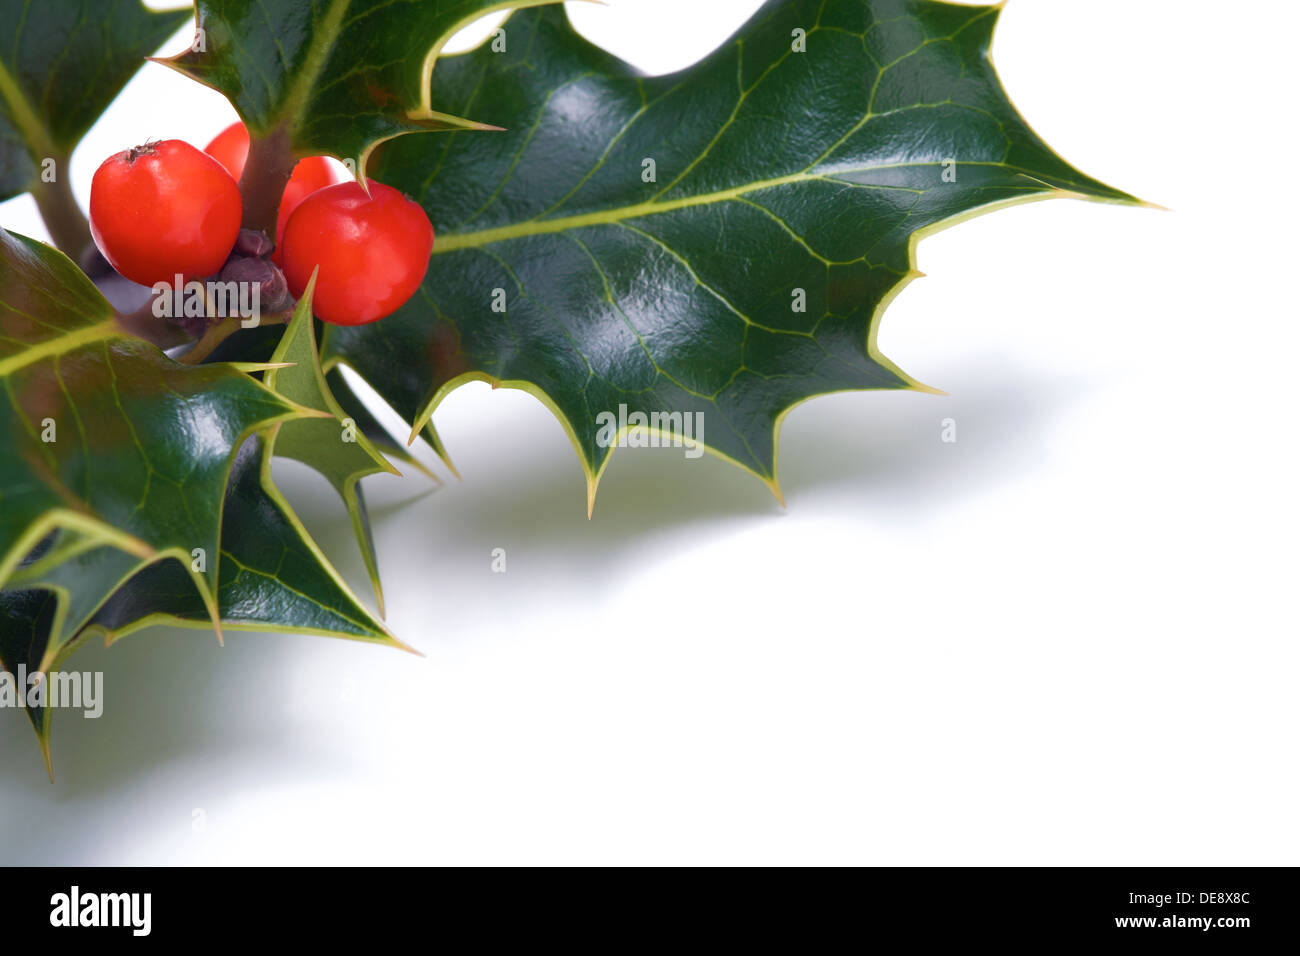 A sprig of Christmas holly on a white background. Stock Photo